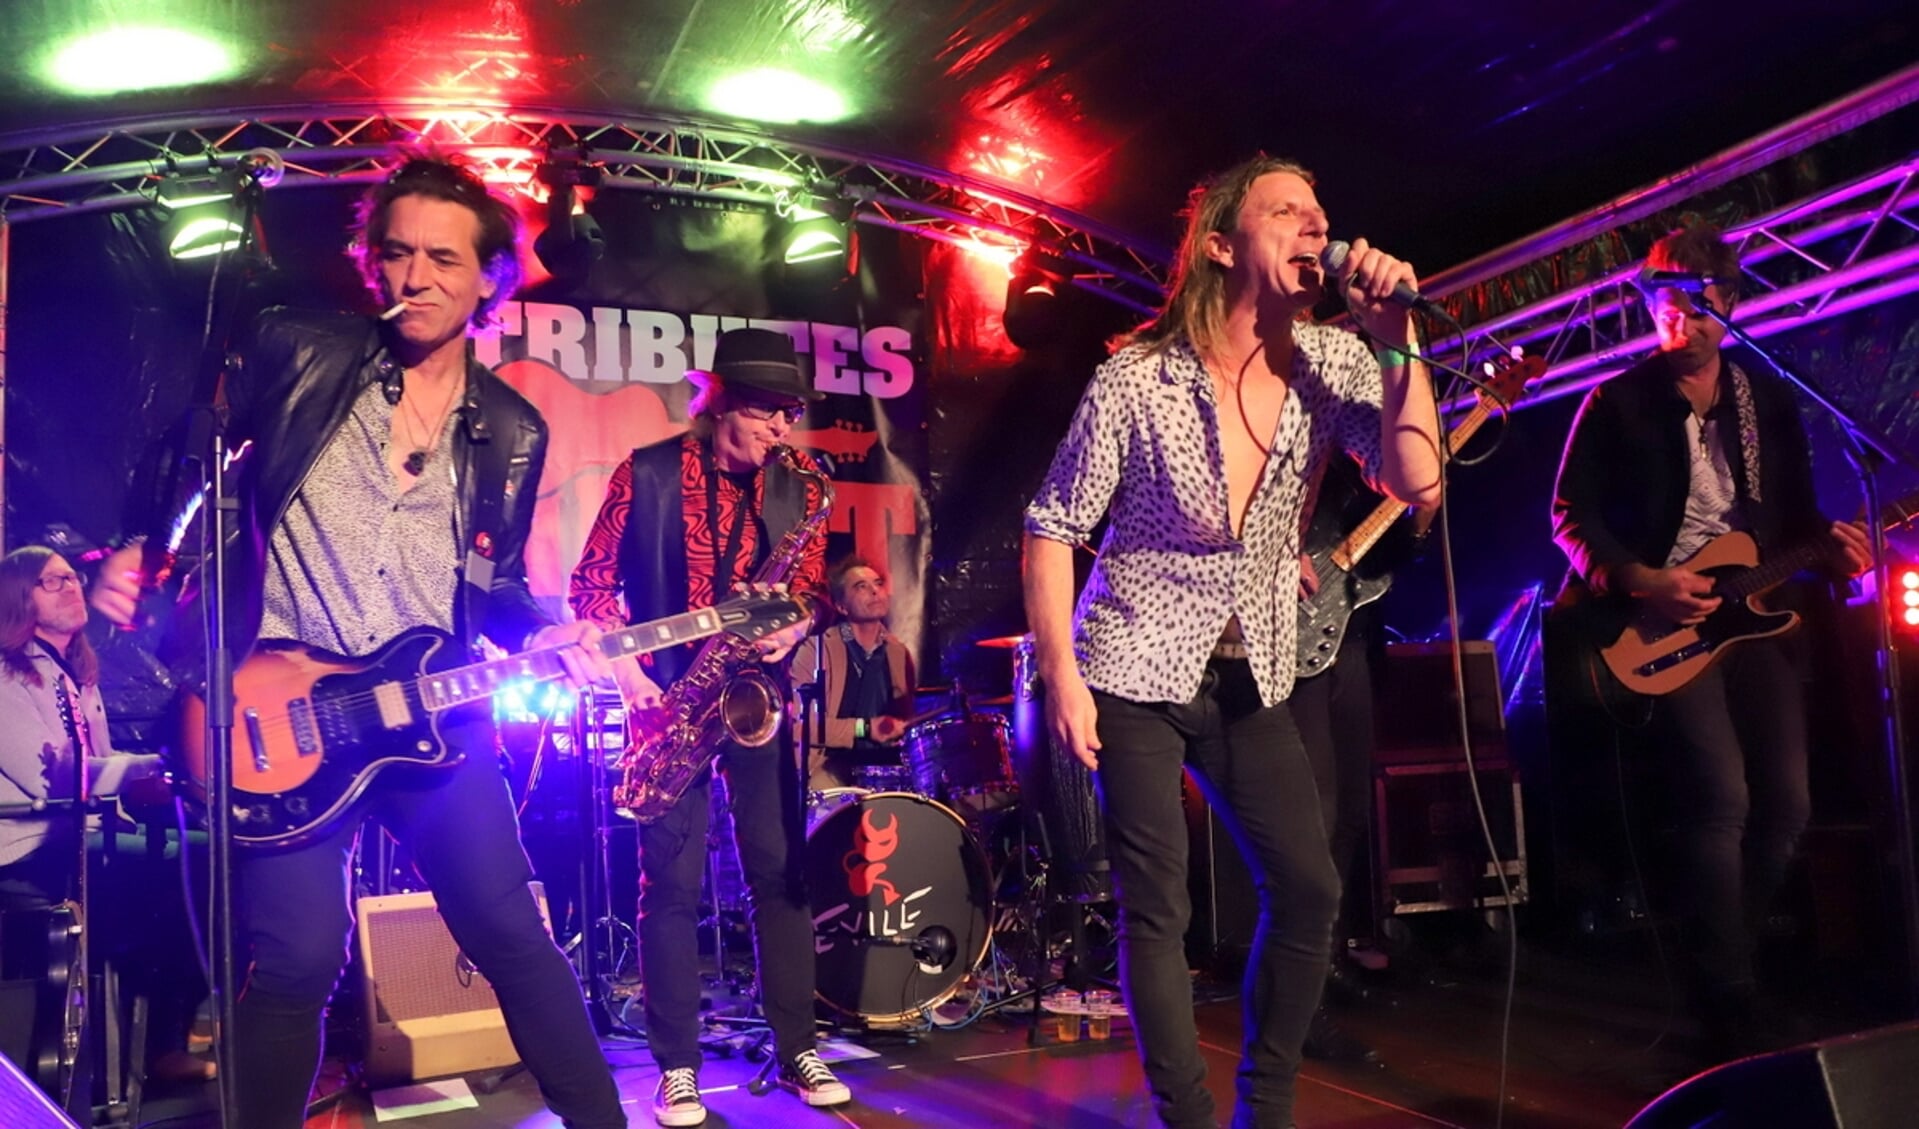 Rolling Stones Tributeband Exile trad op.